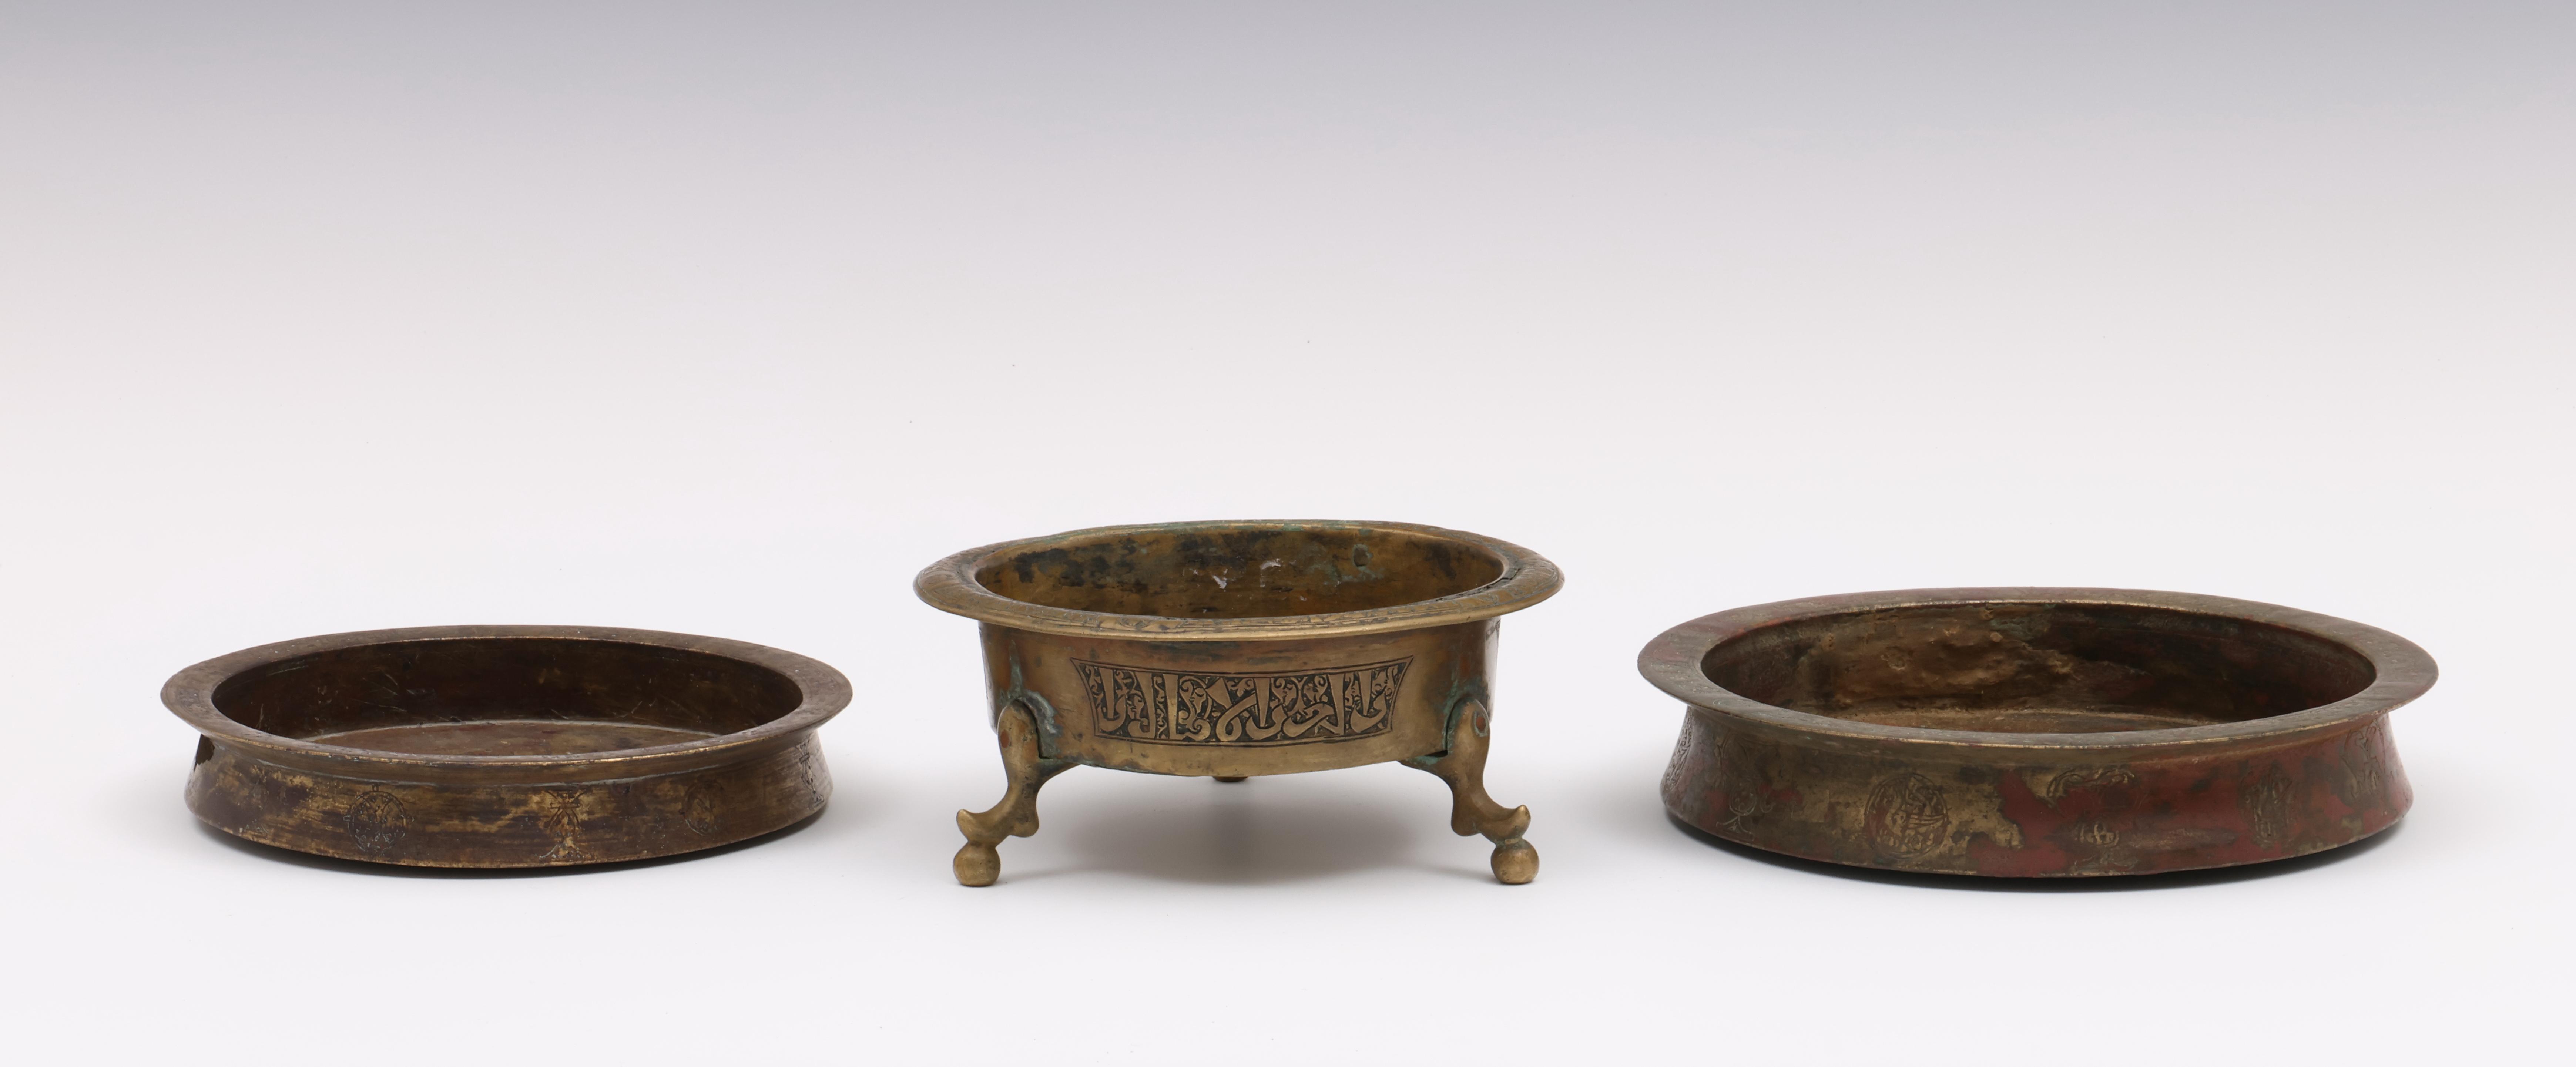 Near Eastern, Seljuk, three bronze dishes, 11th-13th century or later;